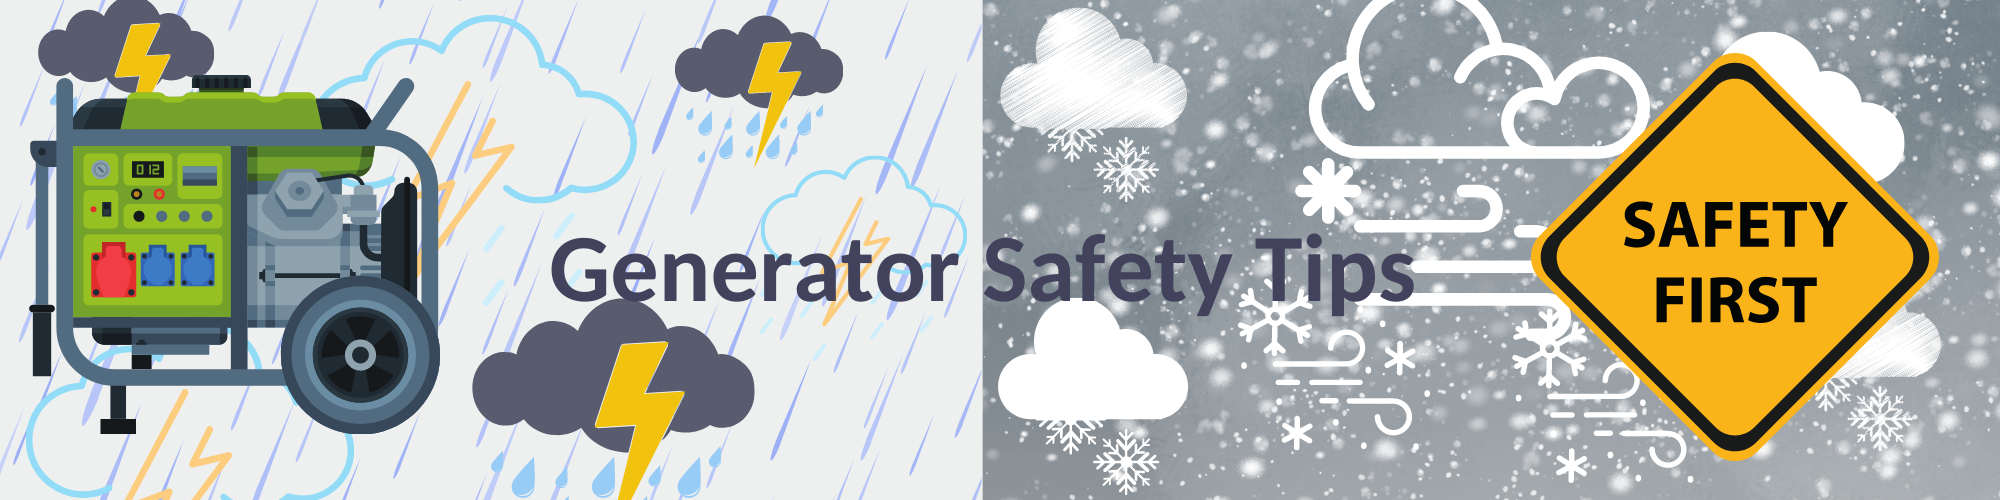 Generator safety in rain and snow